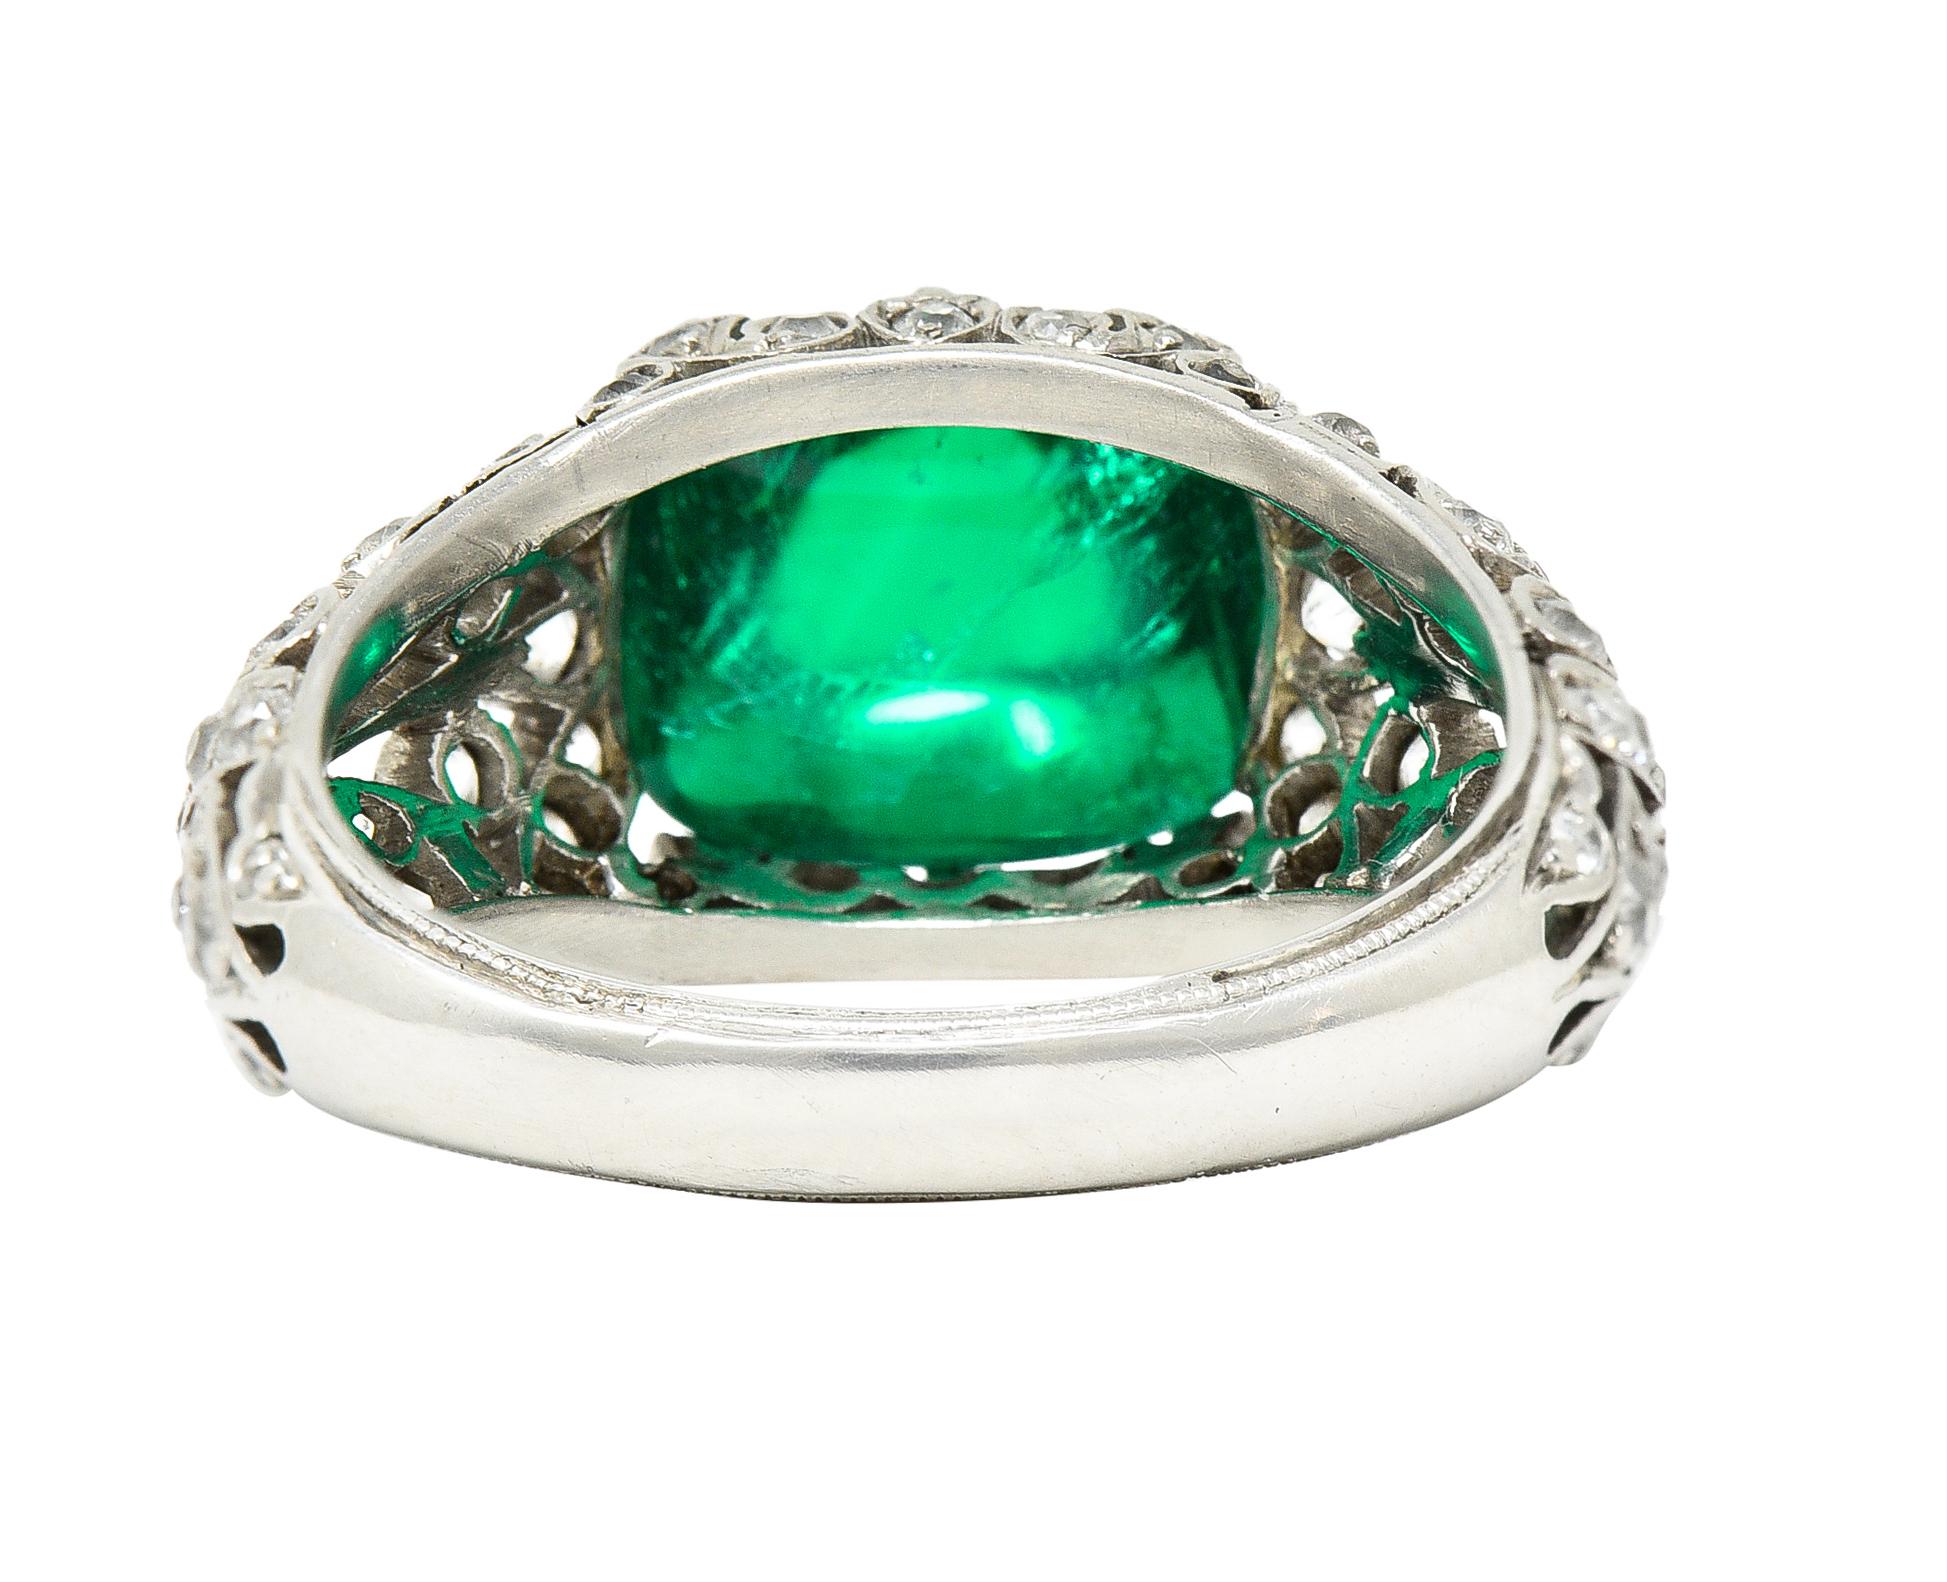 Edwardian 5.90 Carats Colombian Emerald Old European Cut Diamond Platinum Ring In Excellent Condition For Sale In Philadelphia, PA